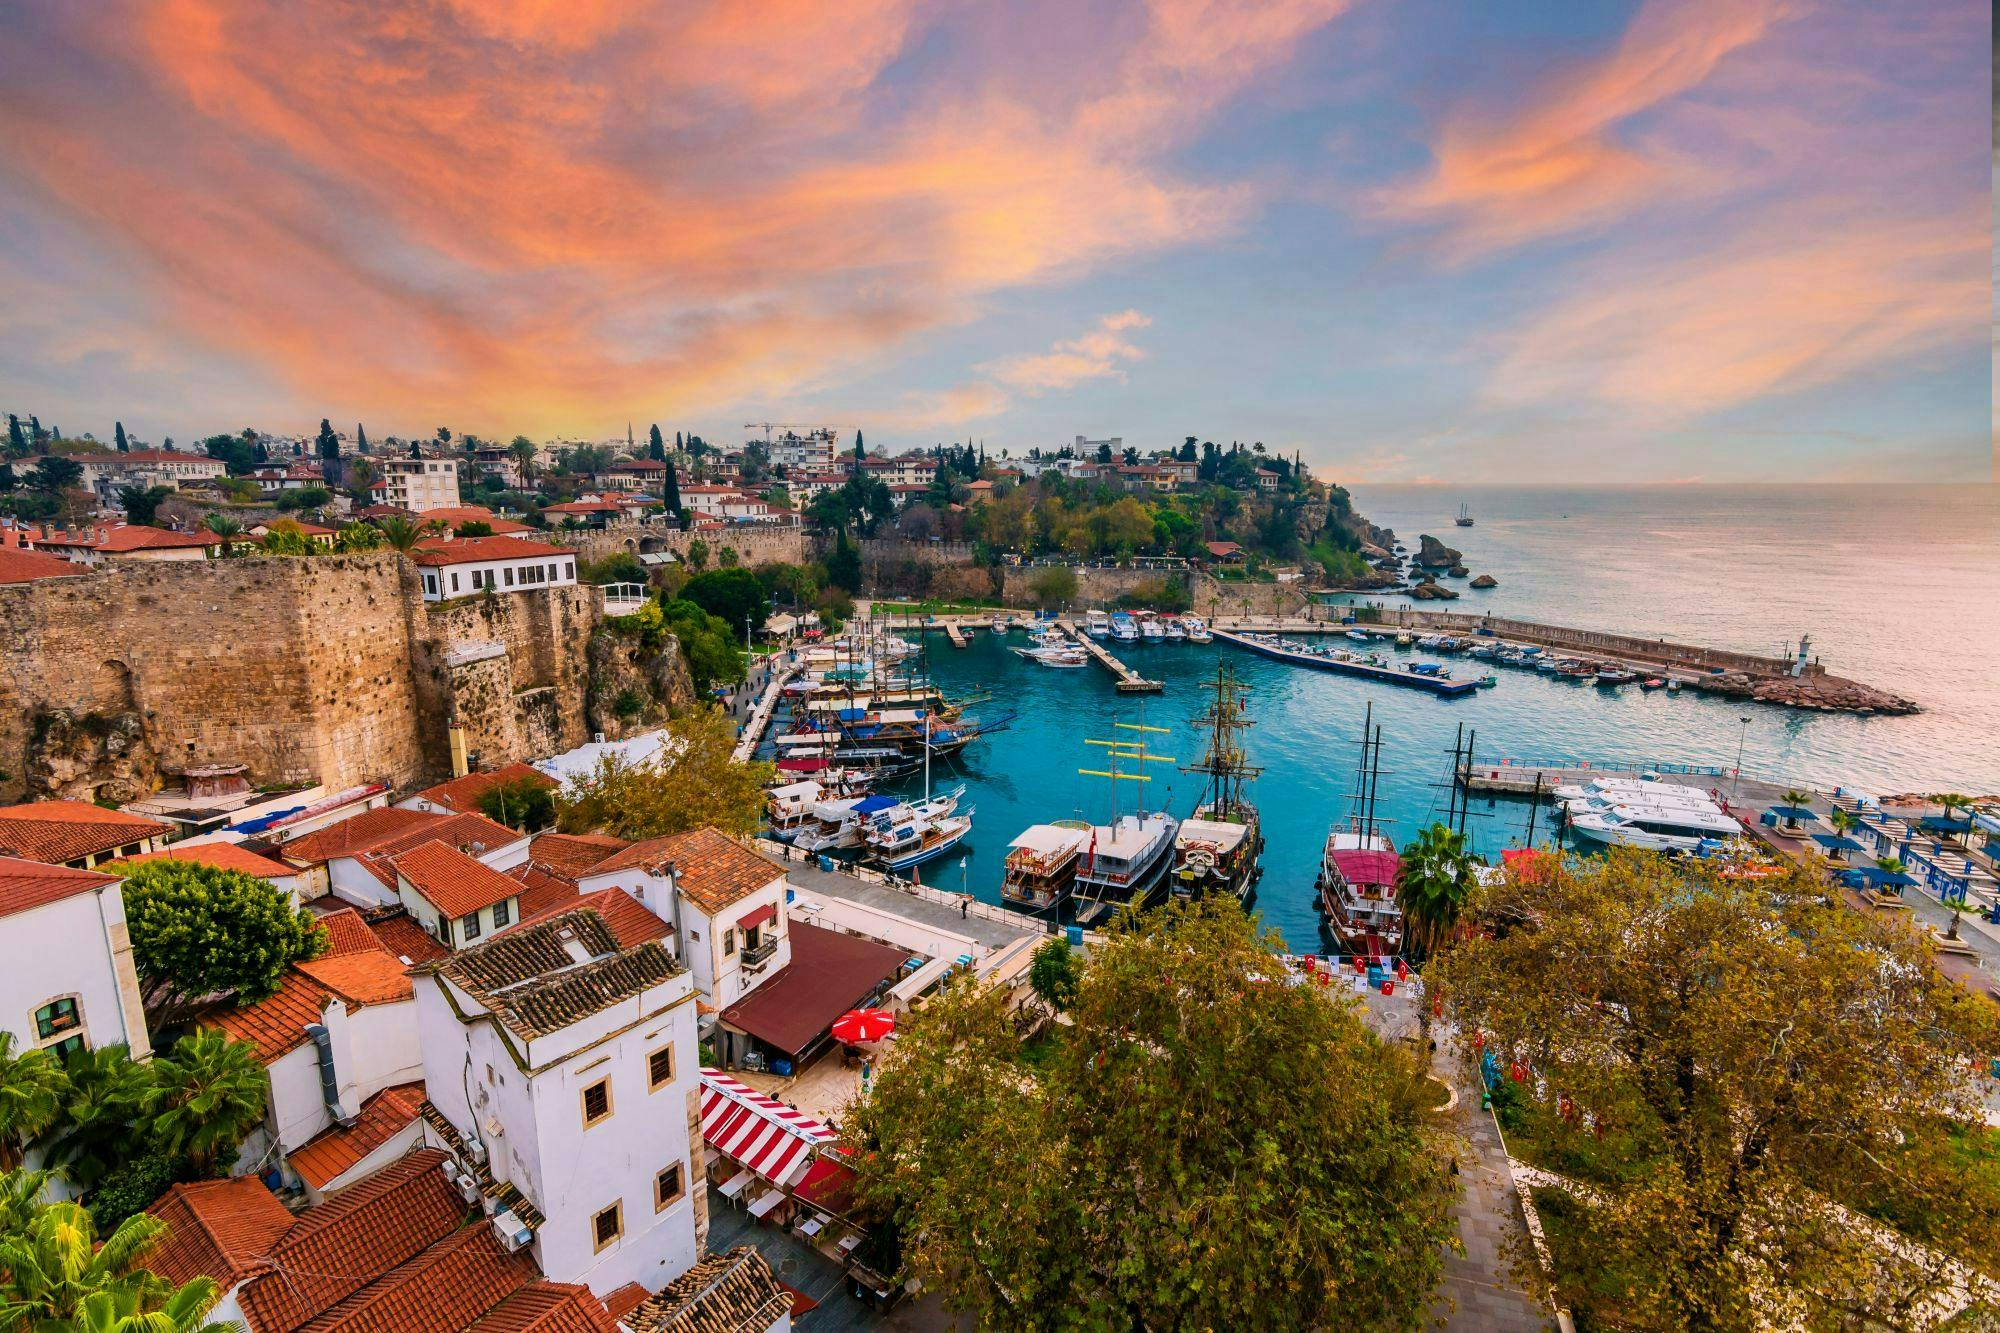 antalya architecture attraction bay beautiful blue boat building castle city cityscape cloudy coast coastal colorful country culture destination dusk harbor harbour historic historical history house journey kaleici landmark mediterranean old panorama sea ship sky sunrise sunset tourism tourist town traditional travel trip turkey türkiye urban vacation view white winter water waterfront outdoors nature scenery